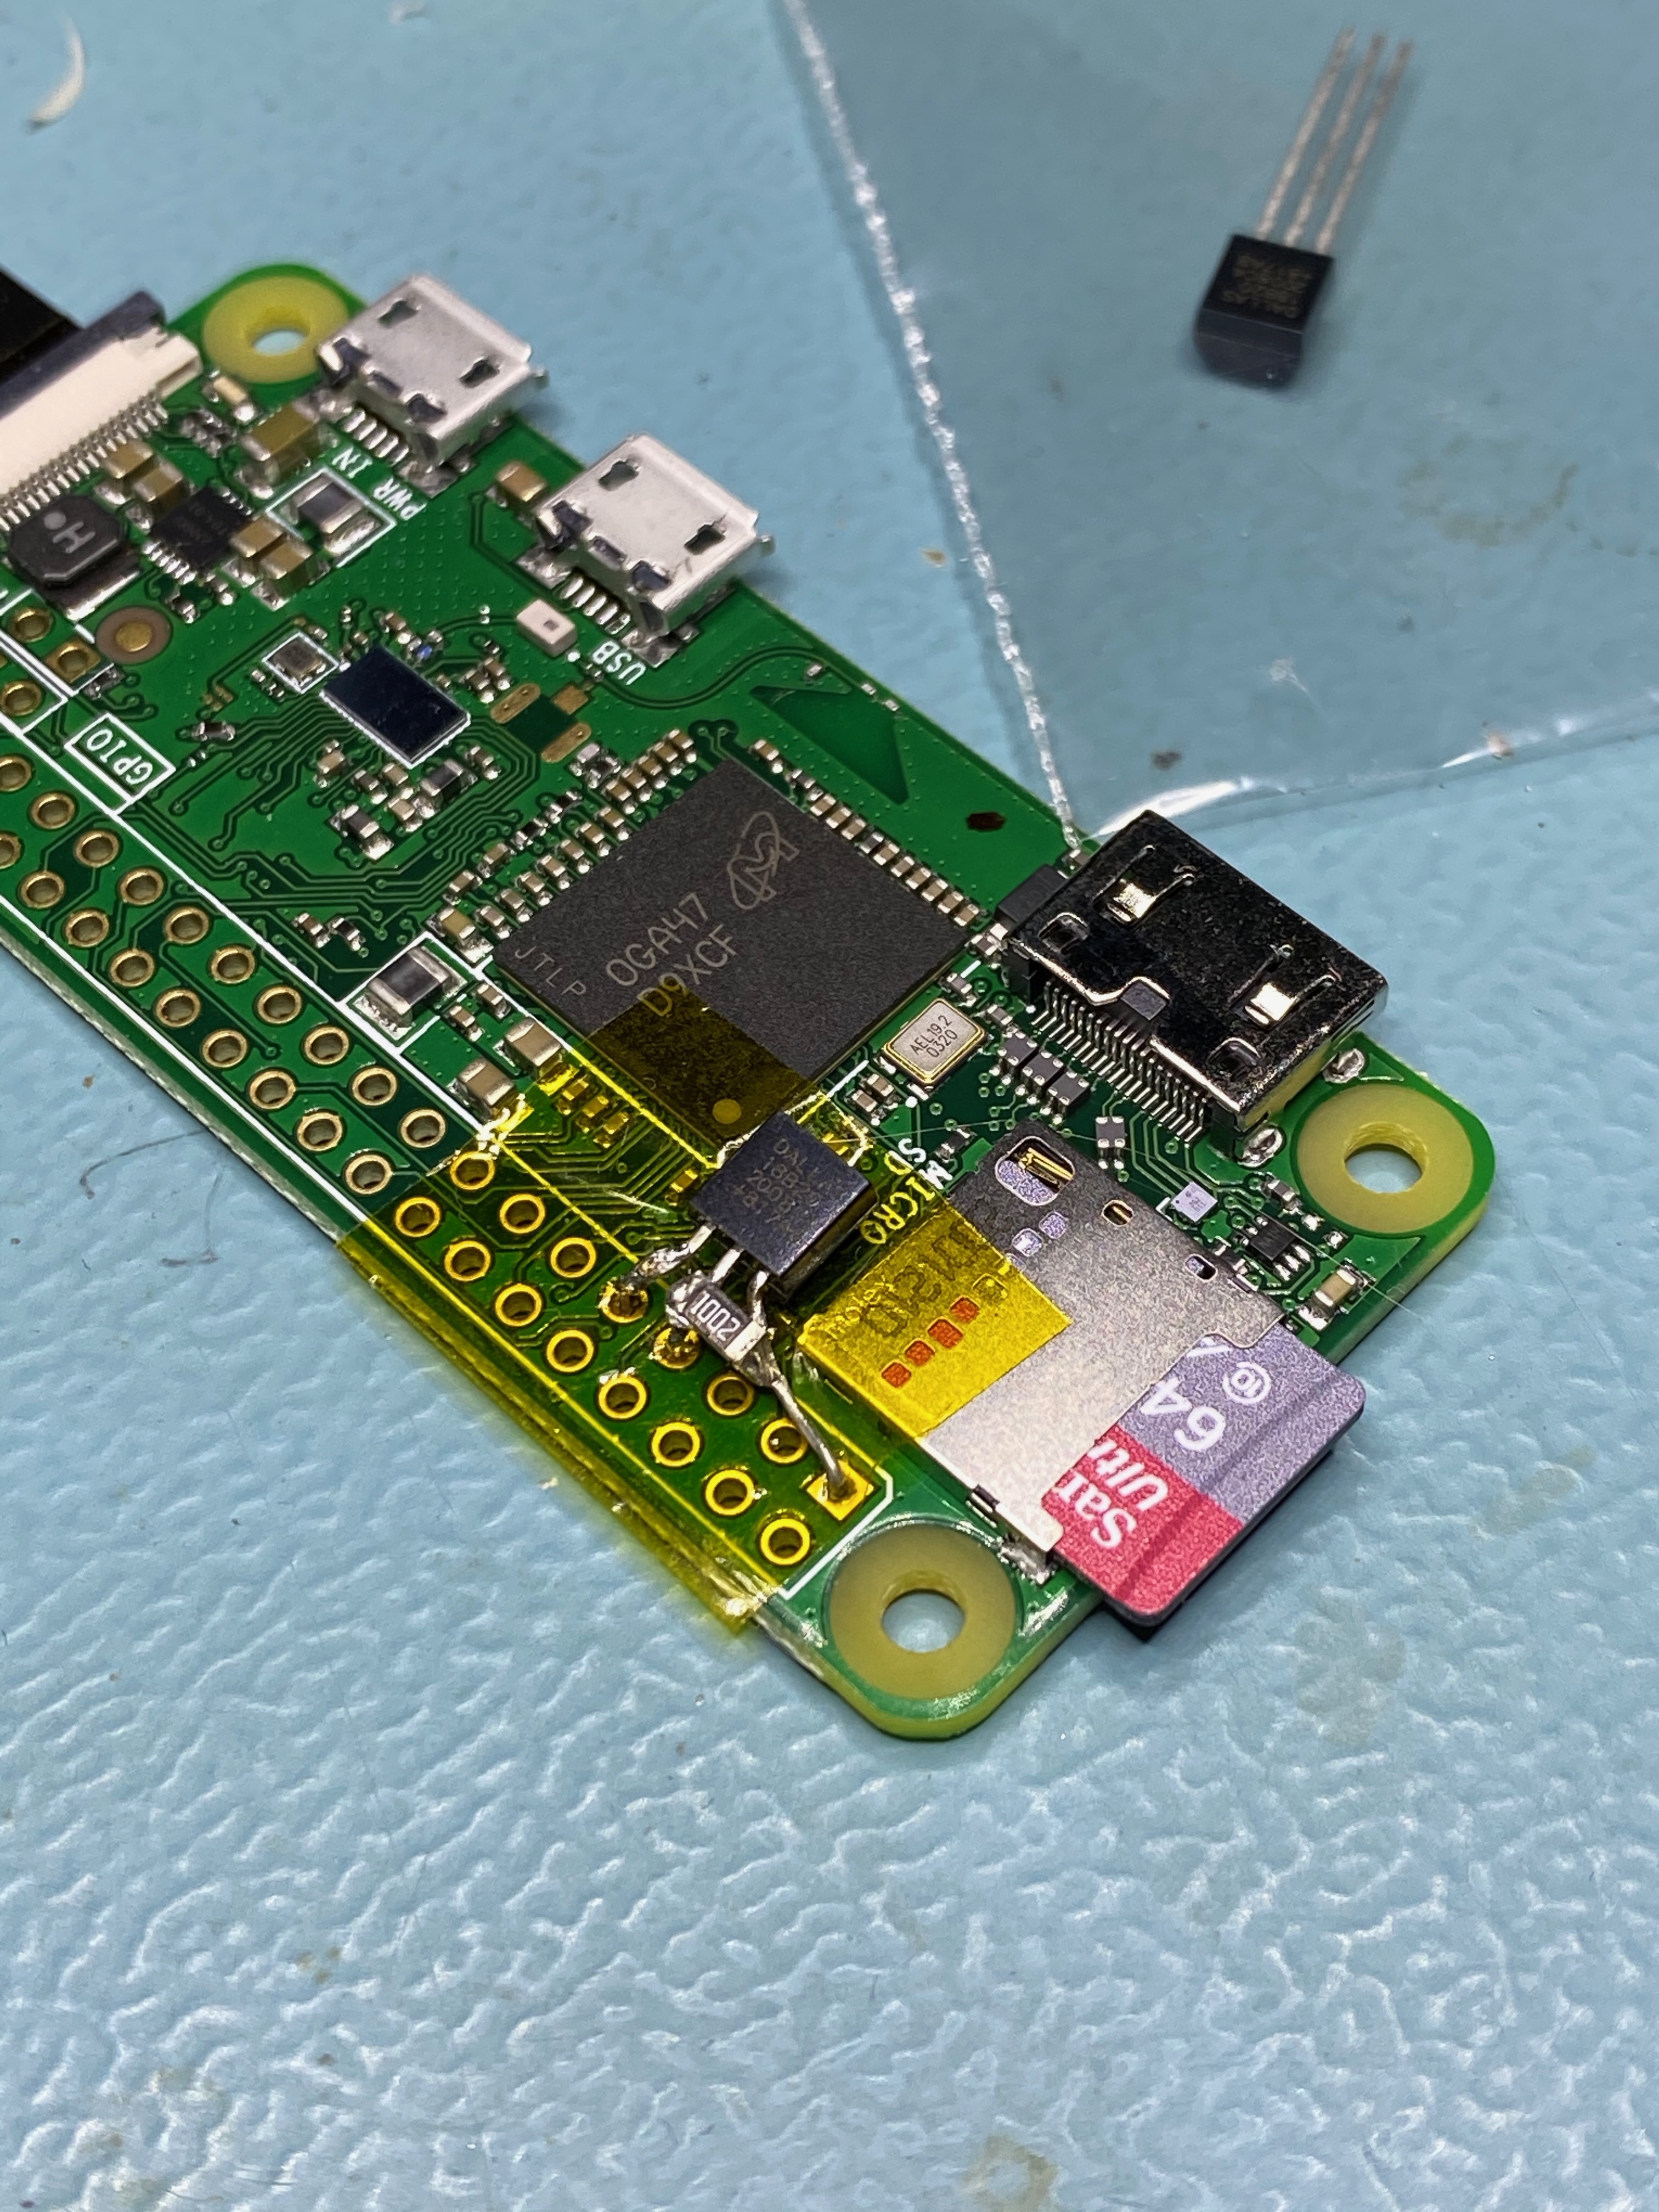 Components soldered to a Raspberry Pi